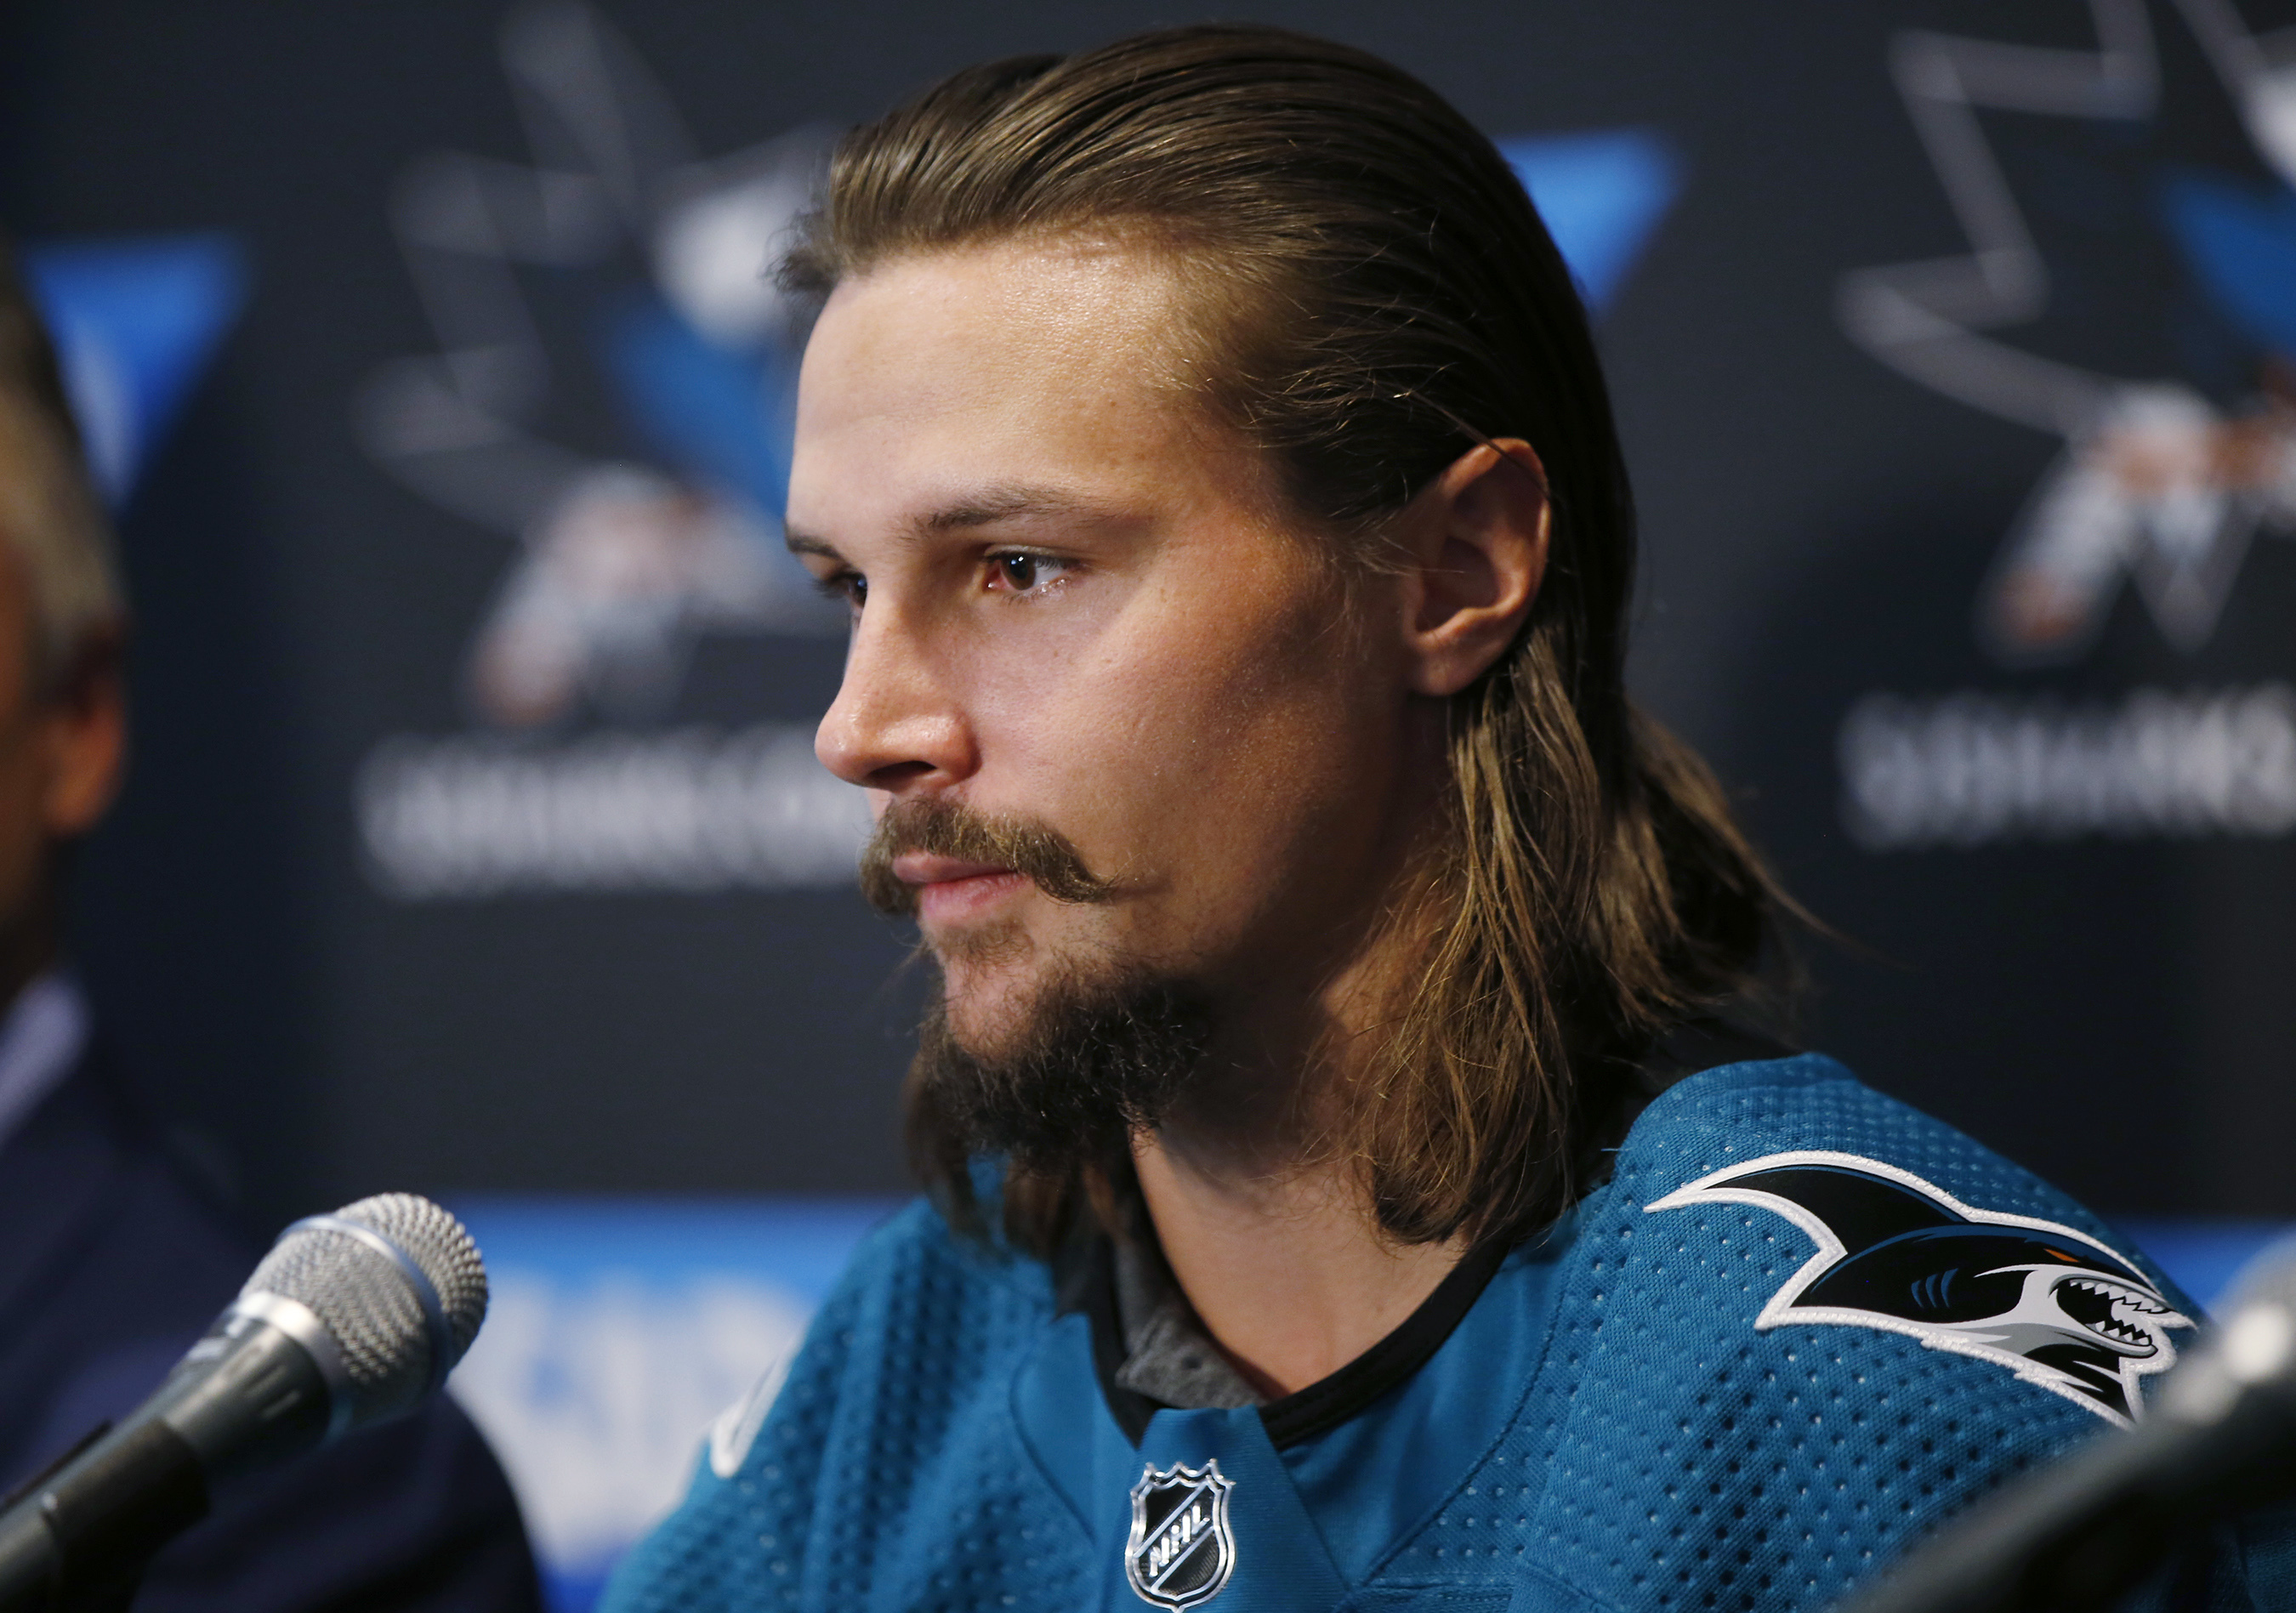 Erik Karlsson looks to fit in on 1st day with Sharks